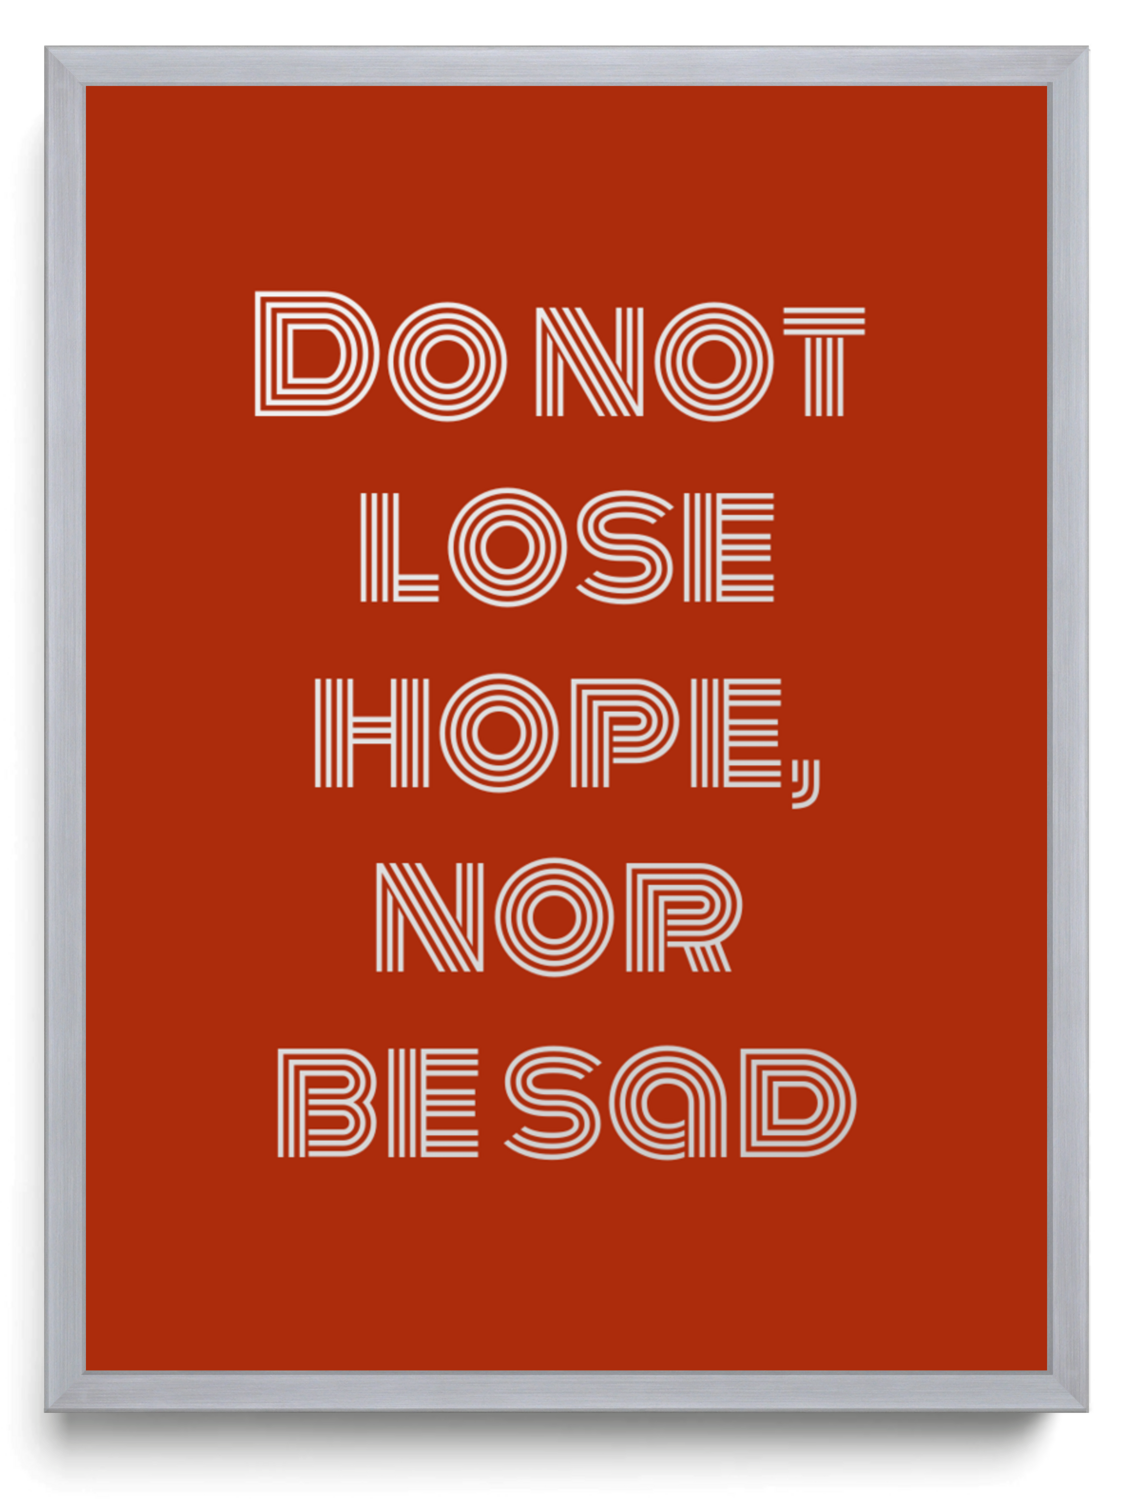 Do not lose hope nor be sad framed typographic print